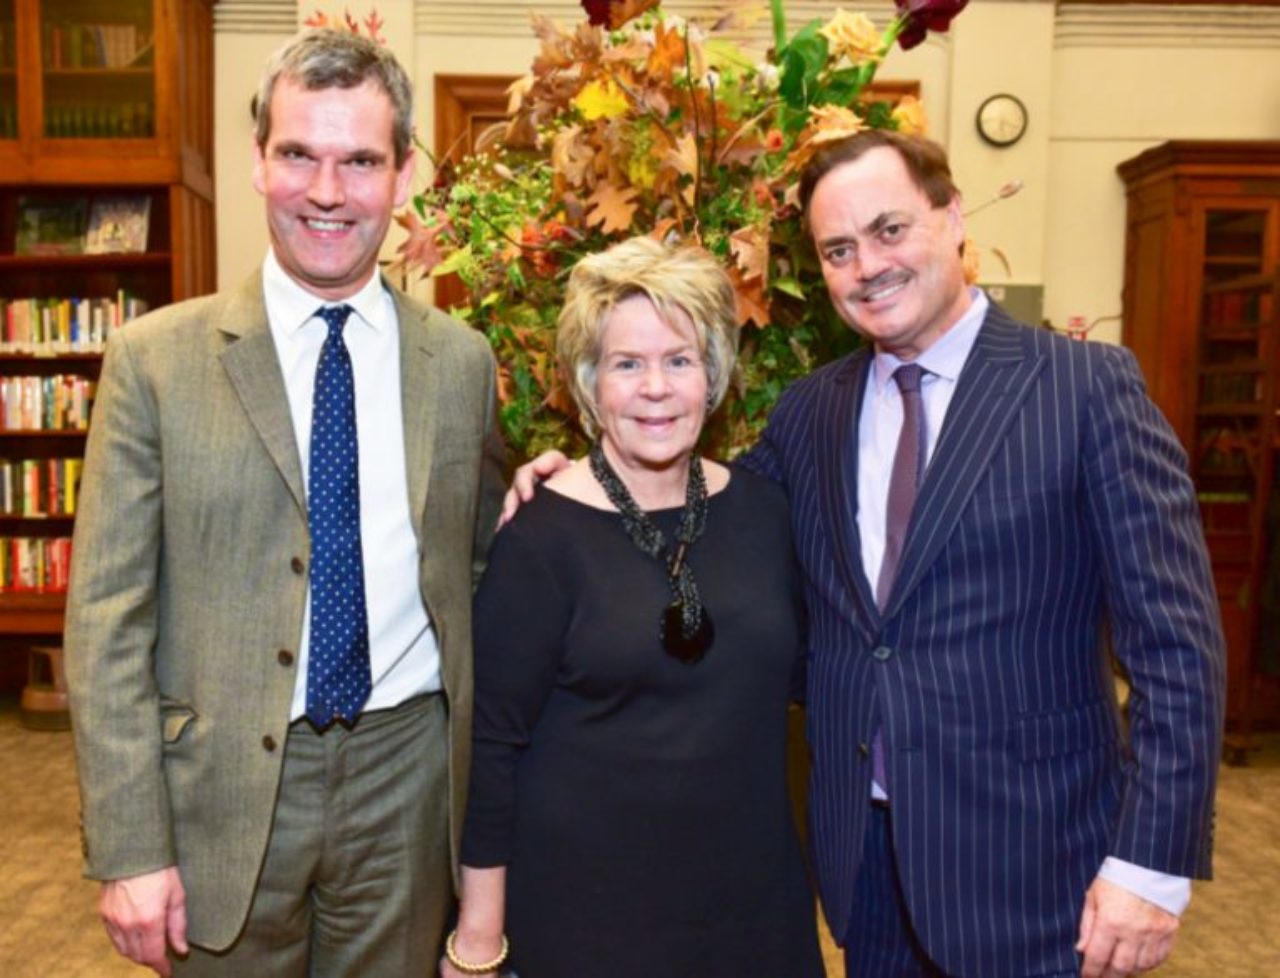 Ben Pentreath with Bunny Williams and ICAA President Peter Lyden (Image Source: Sean Zanni/PMC)